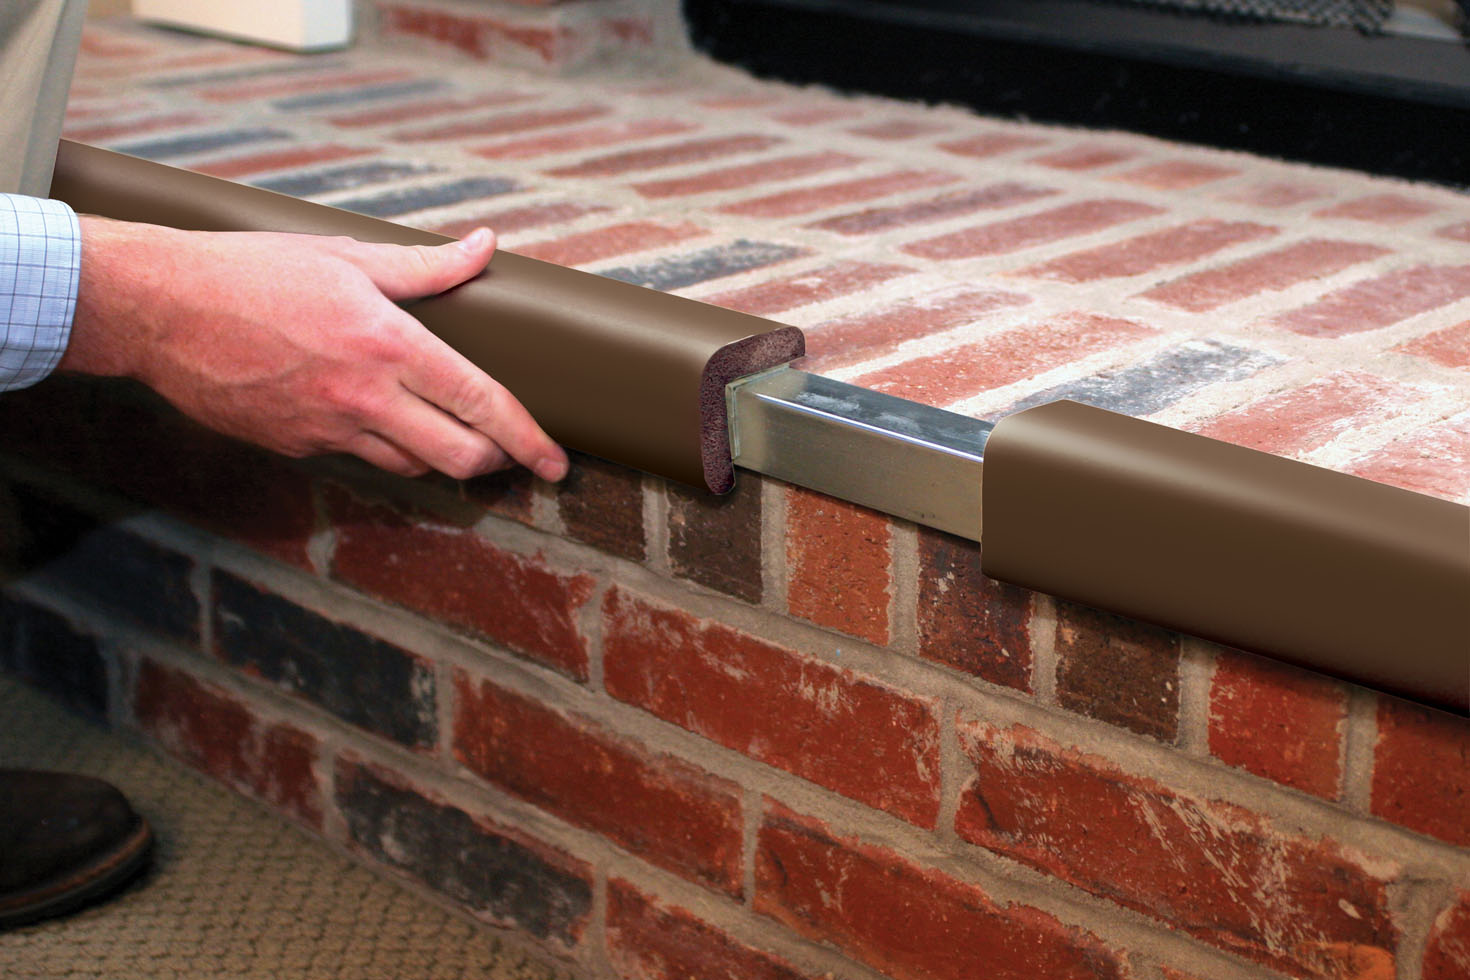 Our Metal Backed Hearth Guard is the only one that will clamp to your fireplace. For hearths 45"-78". Shop all home safety products at Cardinal Gates now!